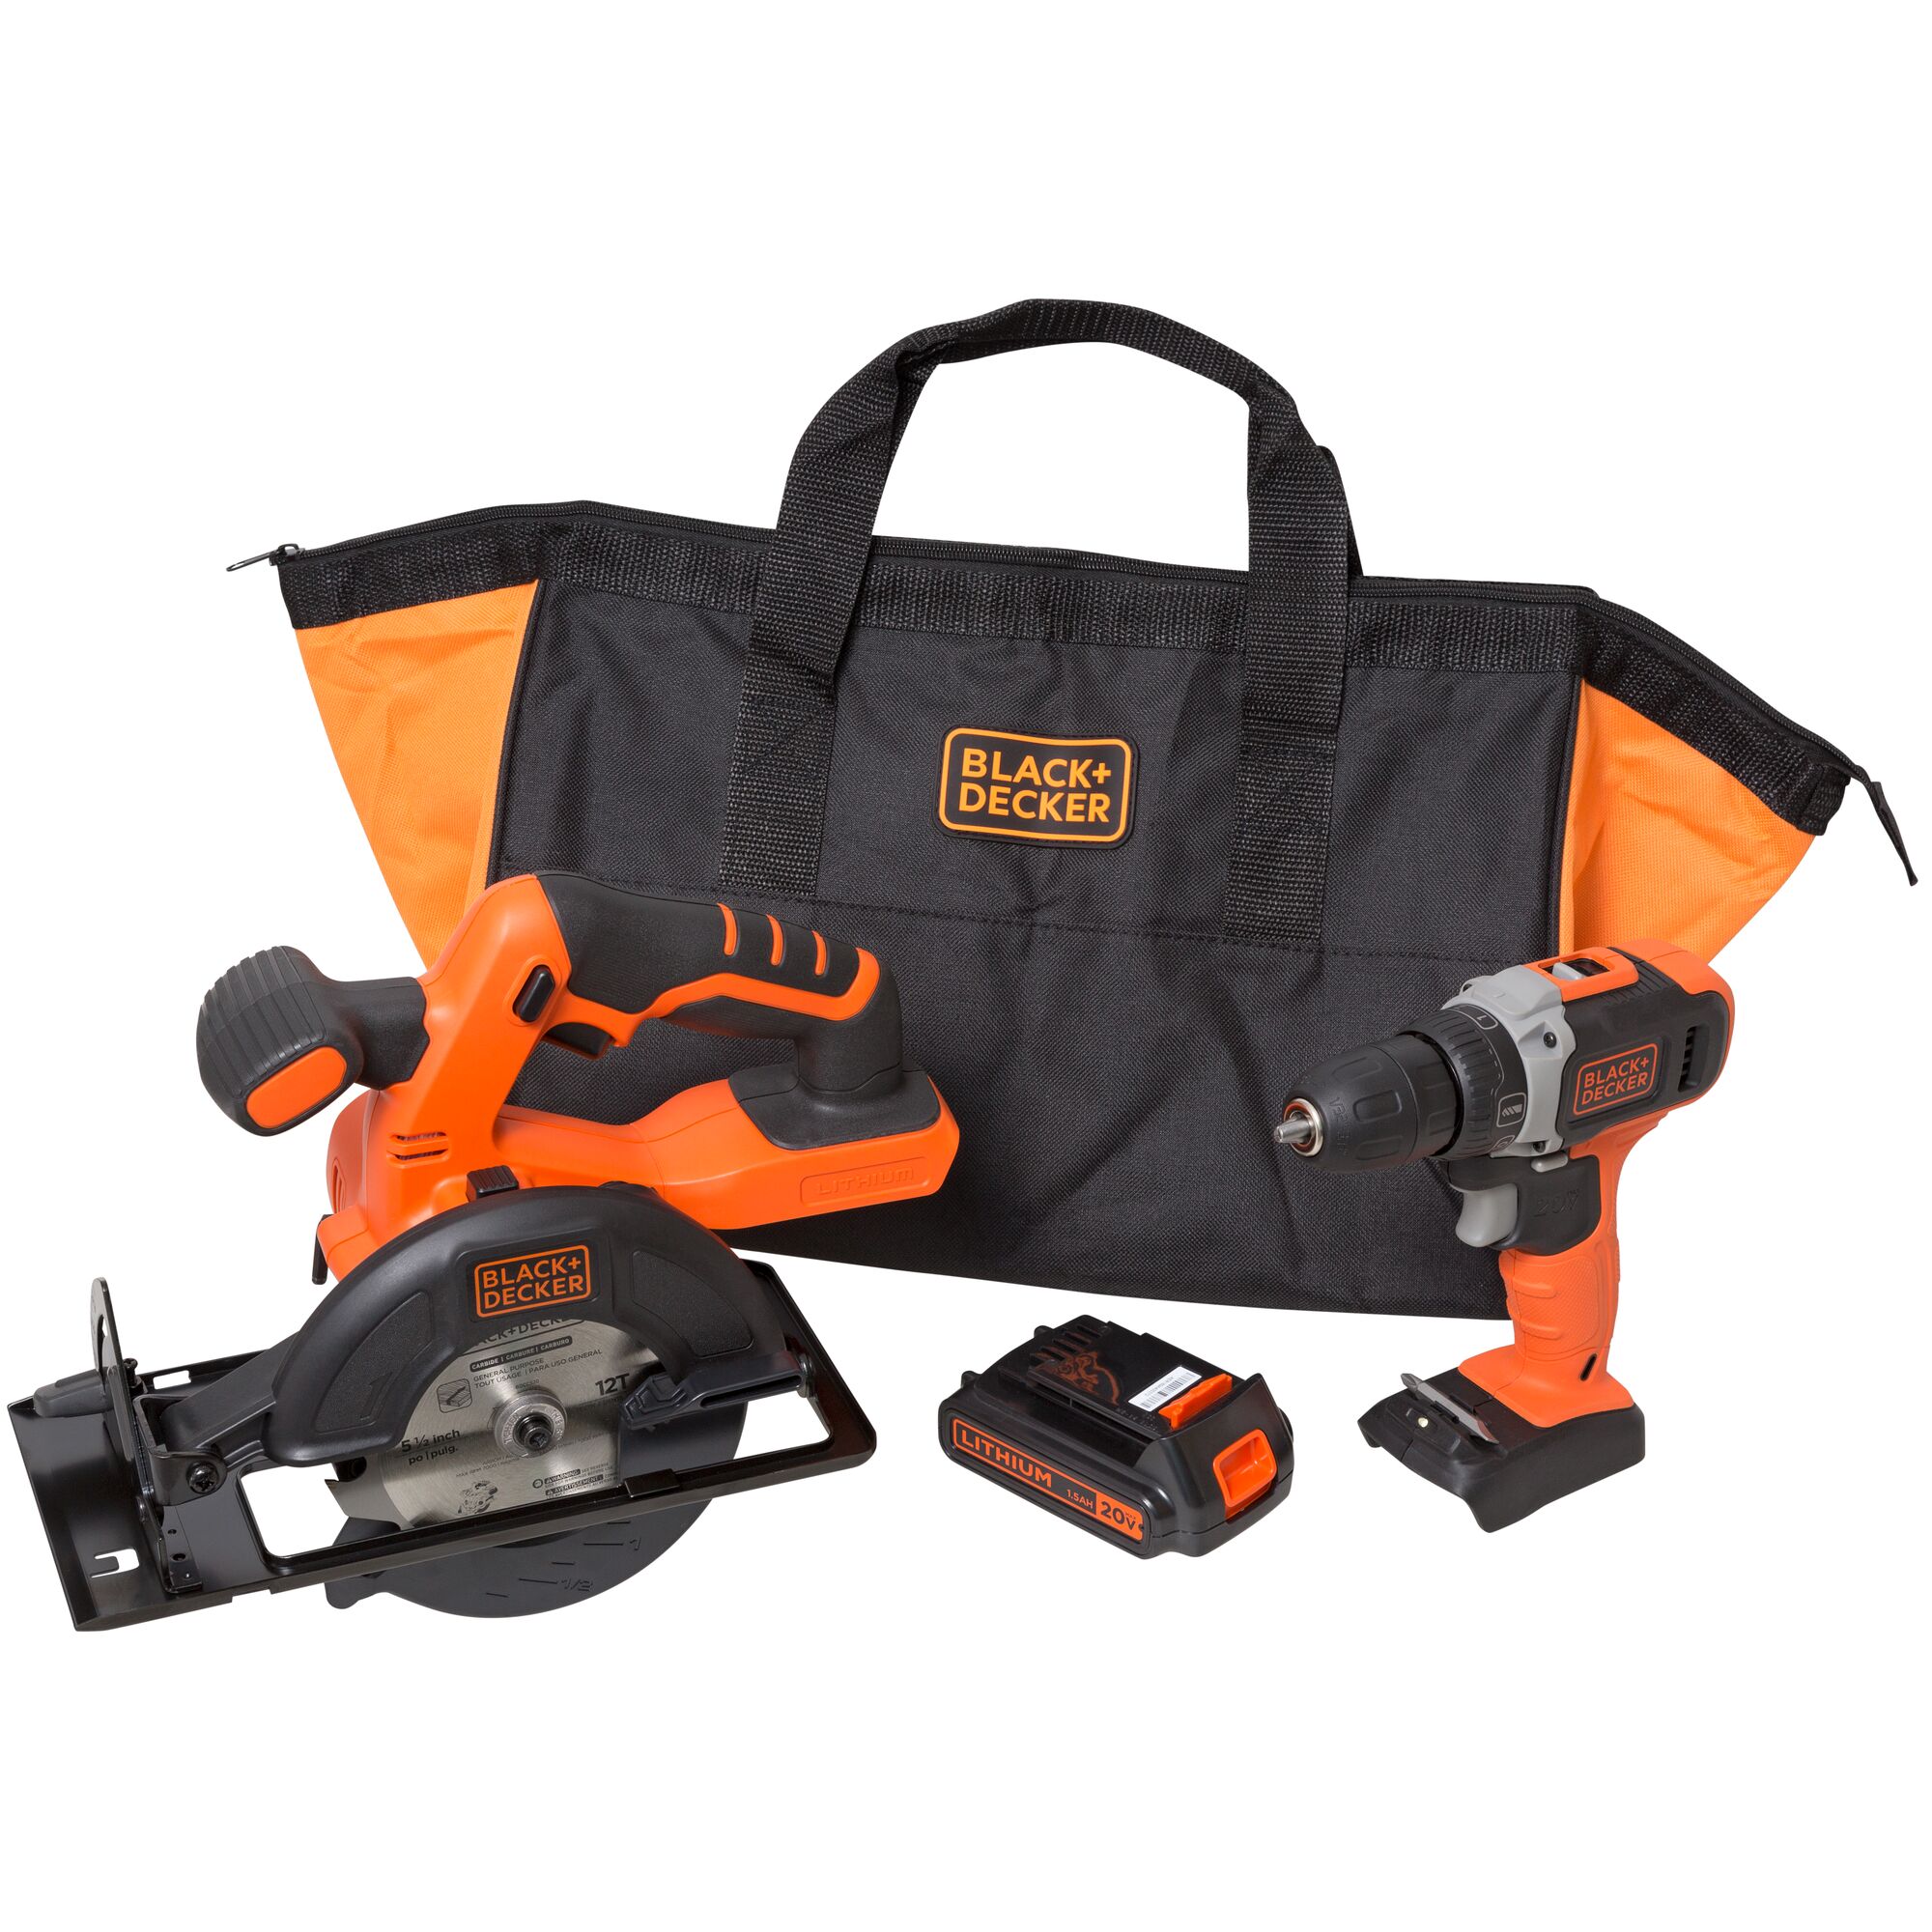 20 volt MAX lithium ion drill and driver plus circular saw combo complete kit.